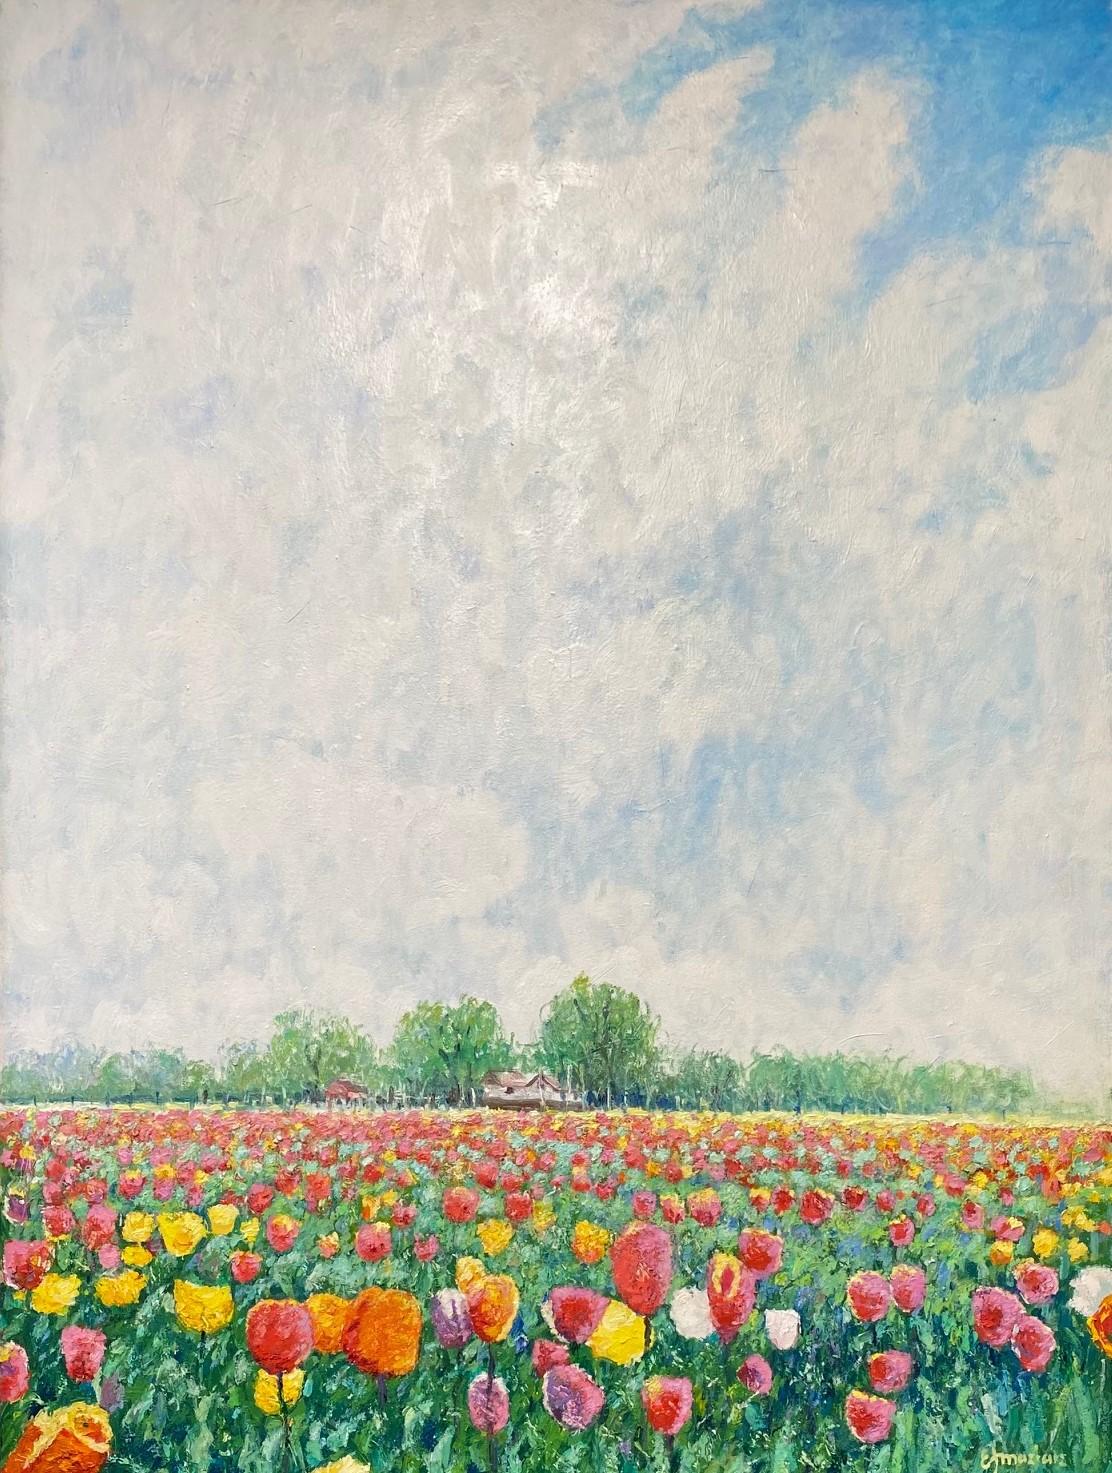 Tulips from Heaven, original 40x30 contemporary expressionist floral landscape - Painting by Eugene Maziarz